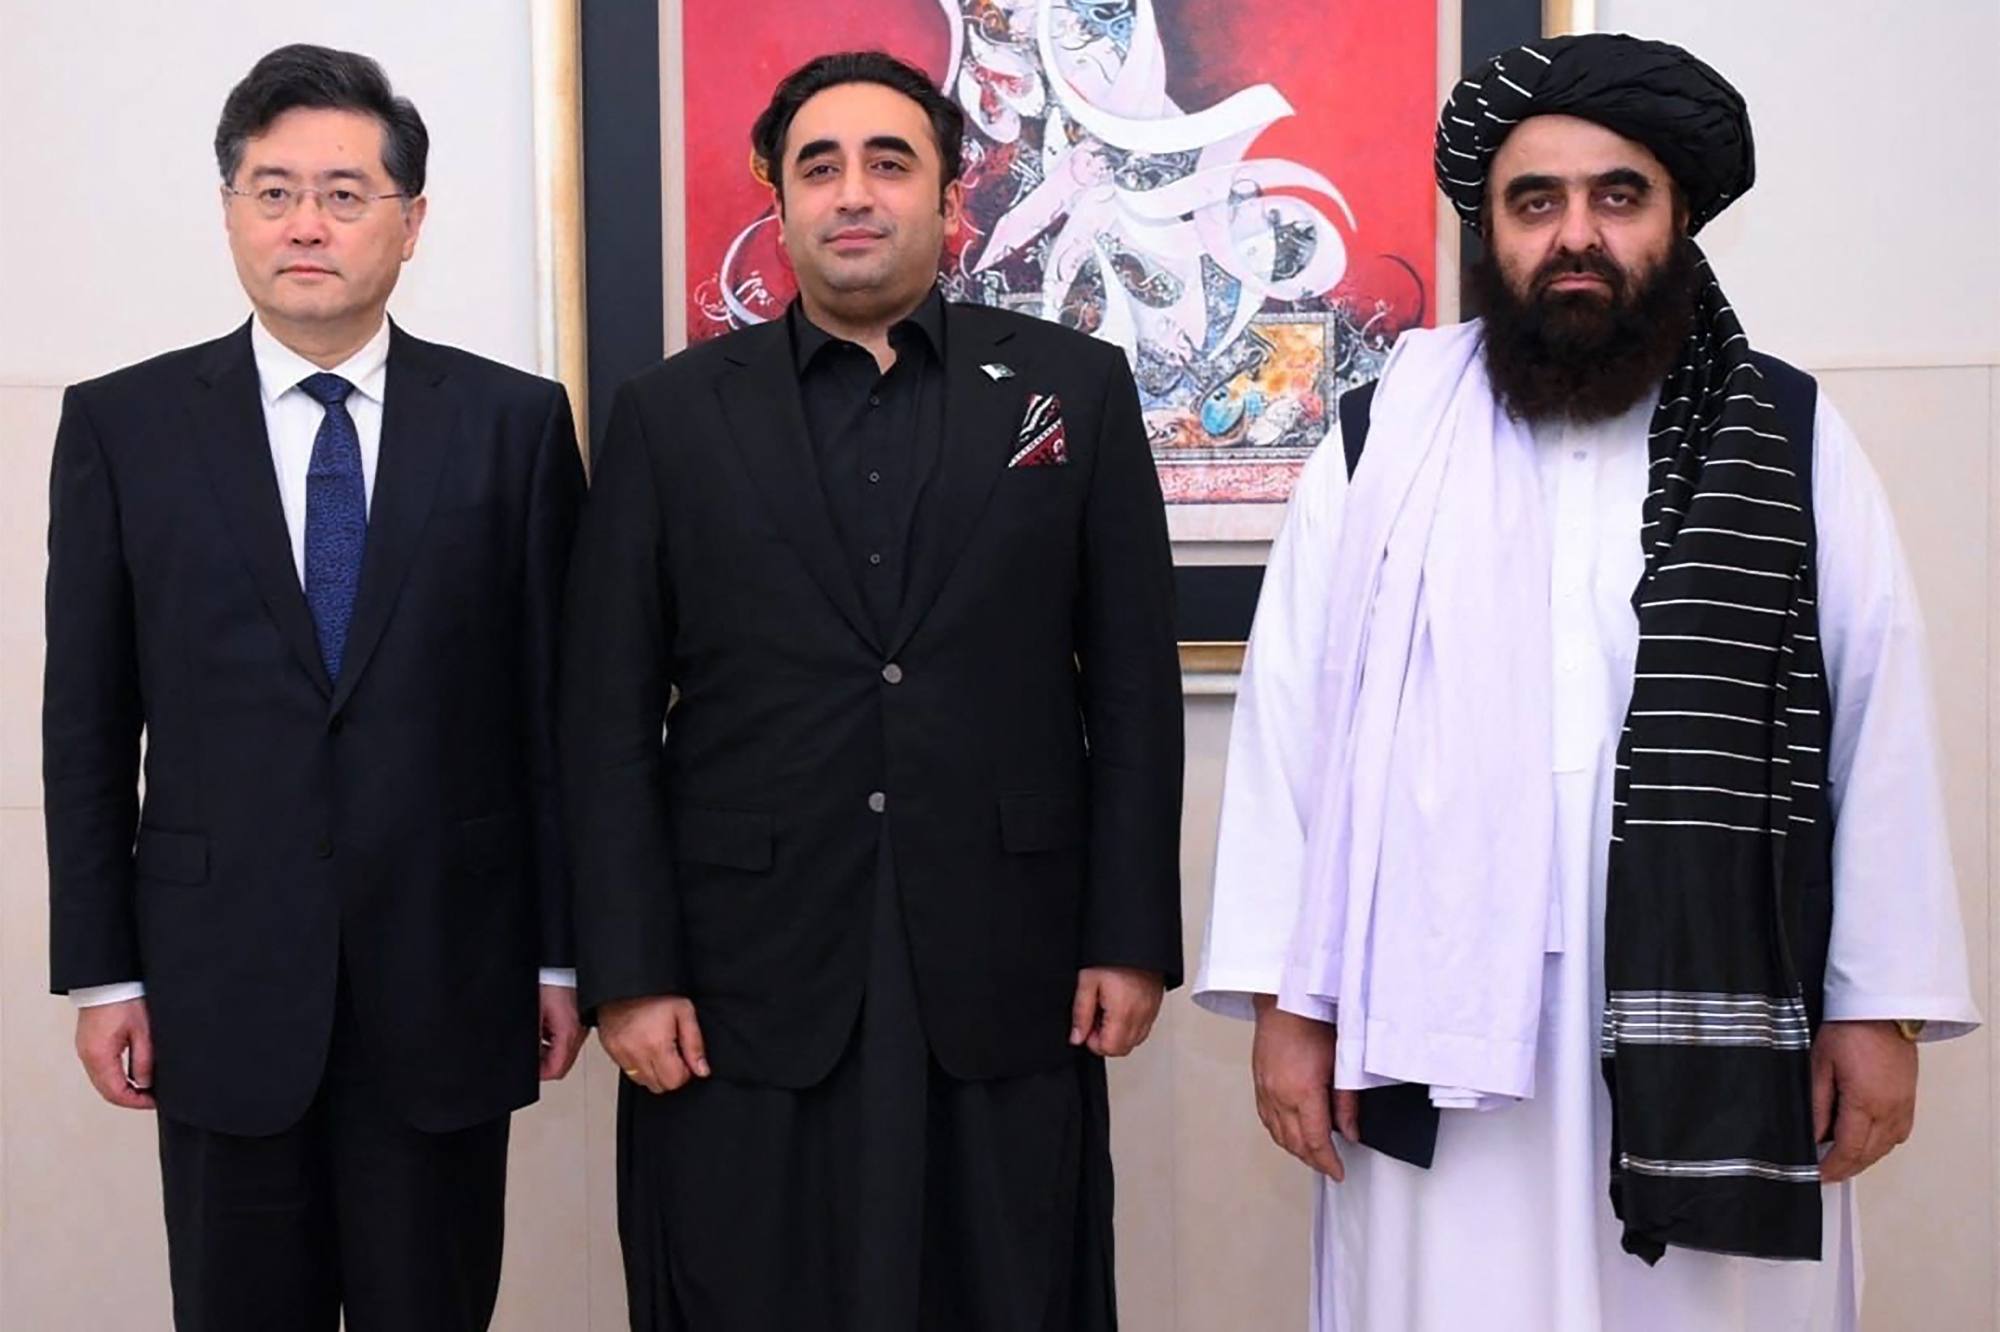 Chinese Foreign Minister Qin Gang, Pakistan’s Foreign Minister Bilawal Bhutto Zardari and Amir Khan Mutaqi, the foreign minister of Afghanistan’s Taliban government, meet in Islamabad on May 6. Photo: AFP